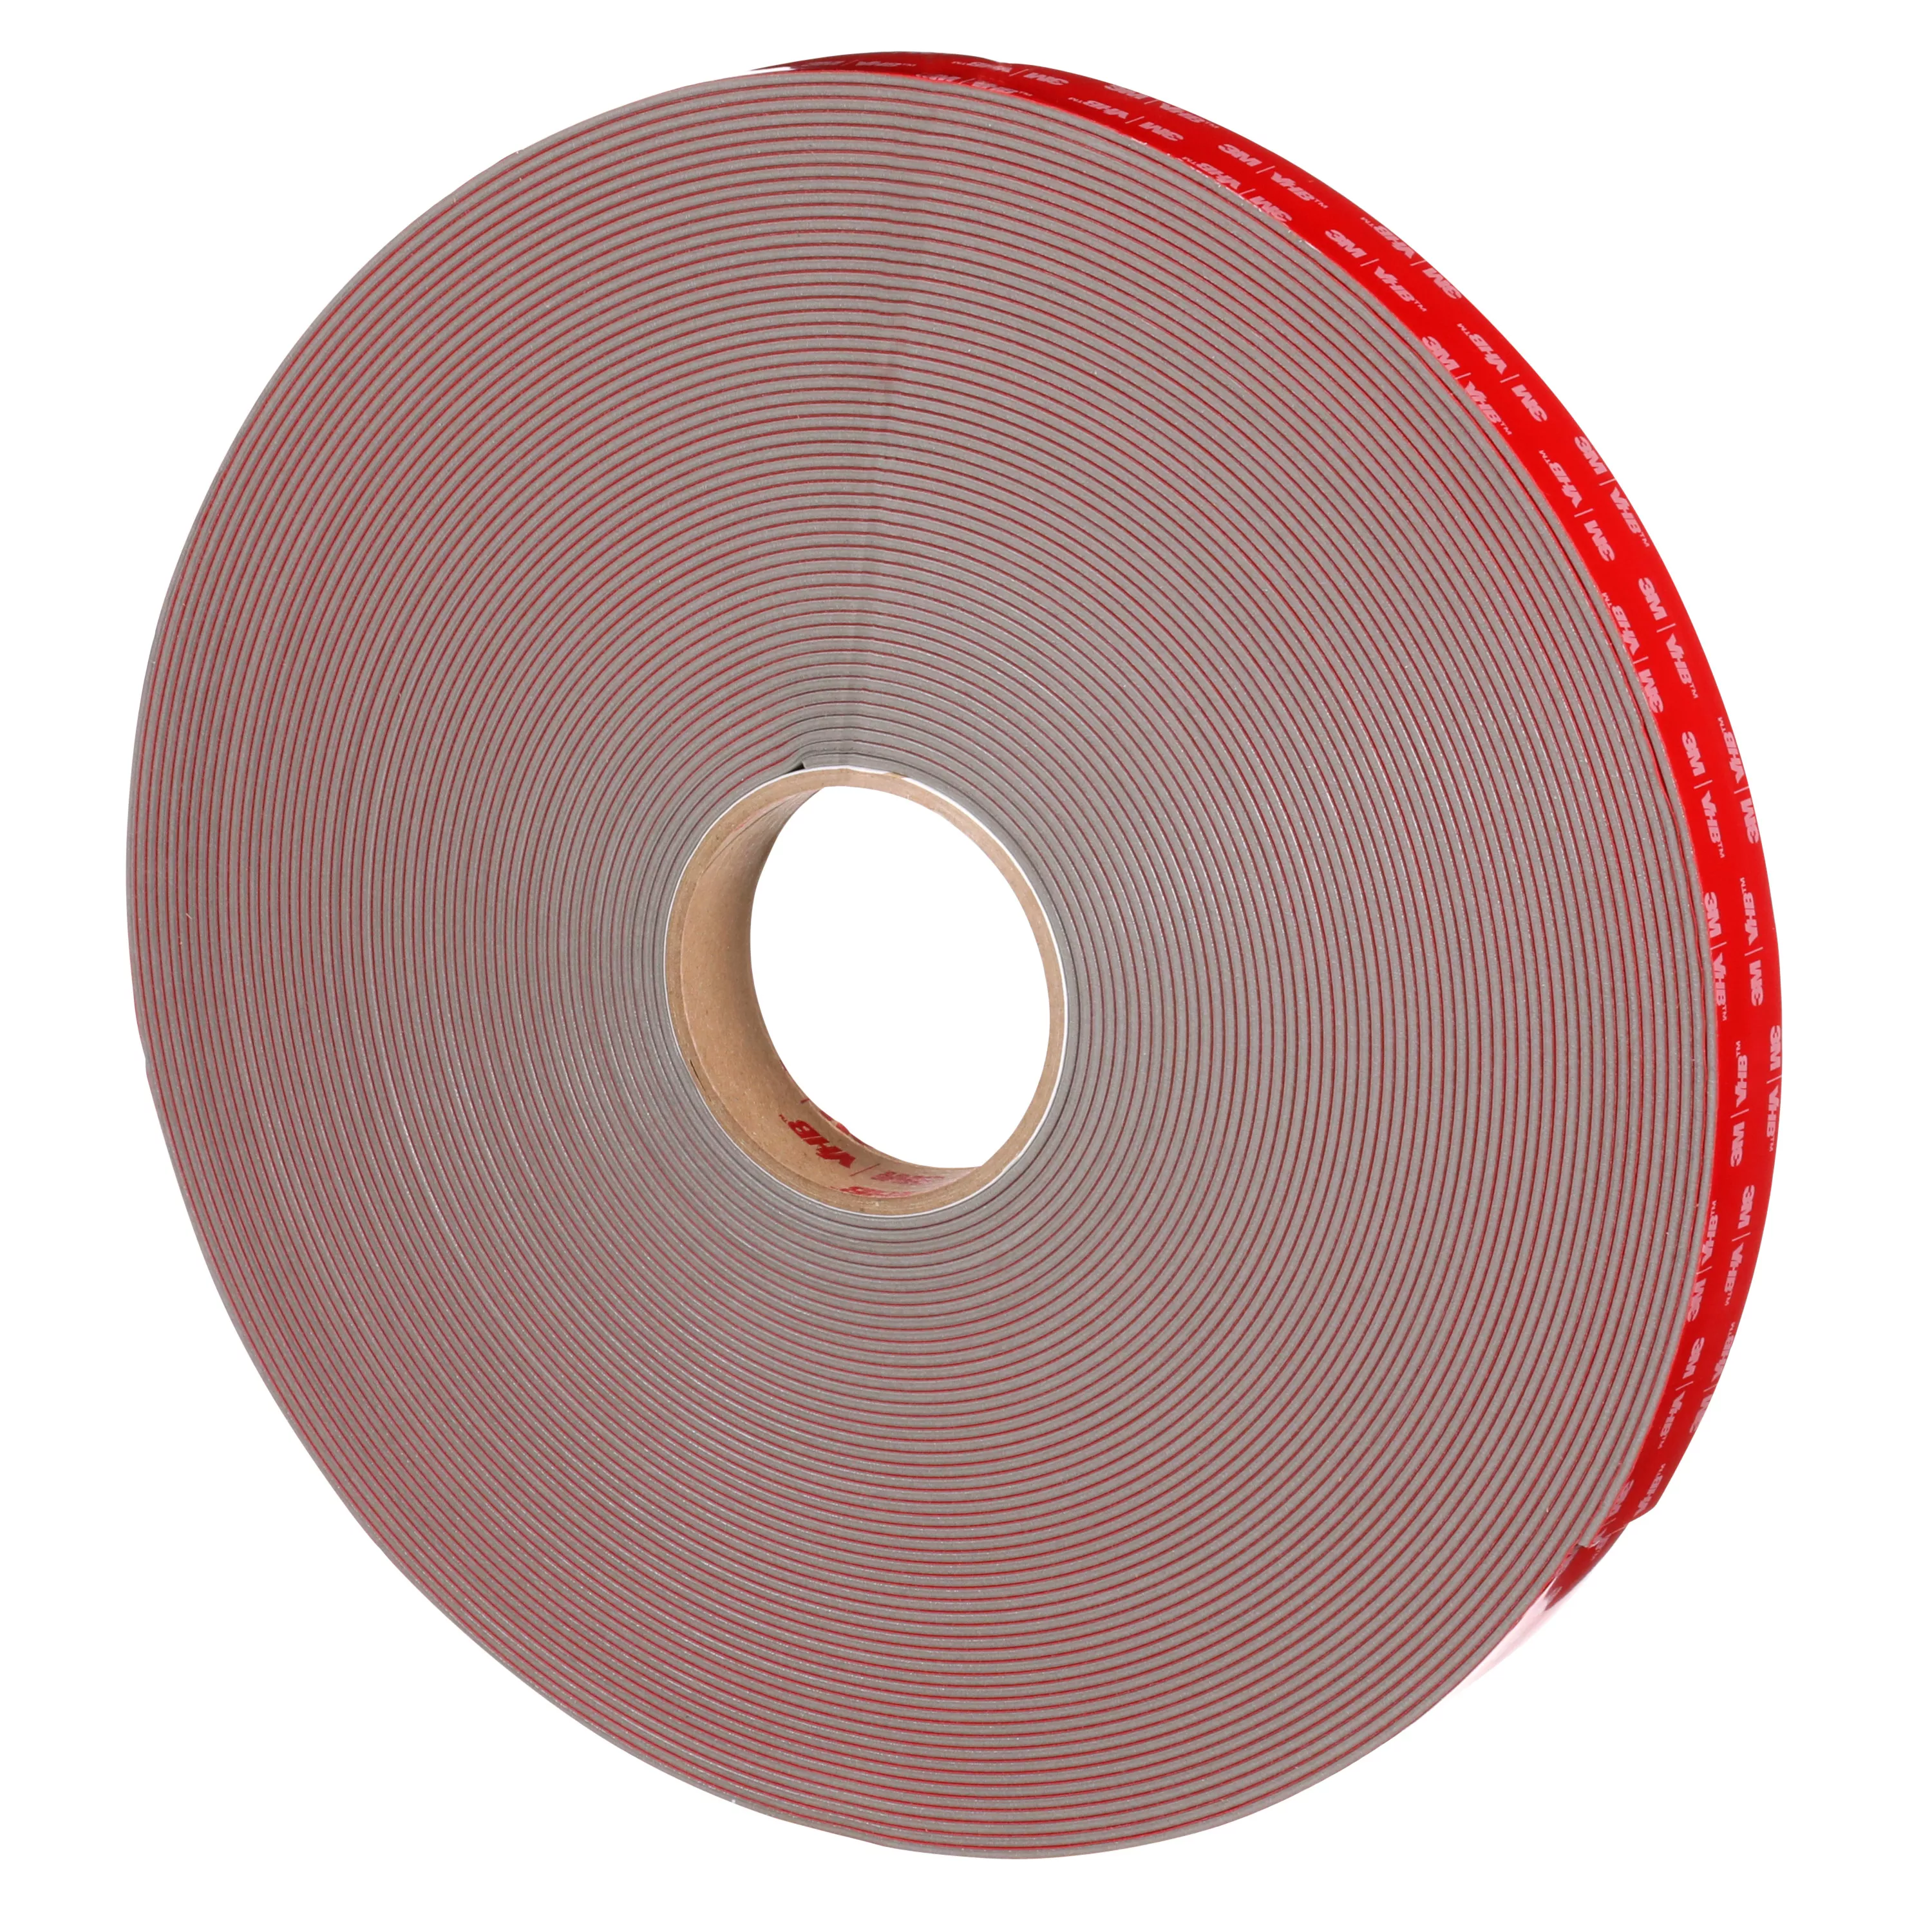 Product Number 4941 | 3M™ VHB™ Tape 4941